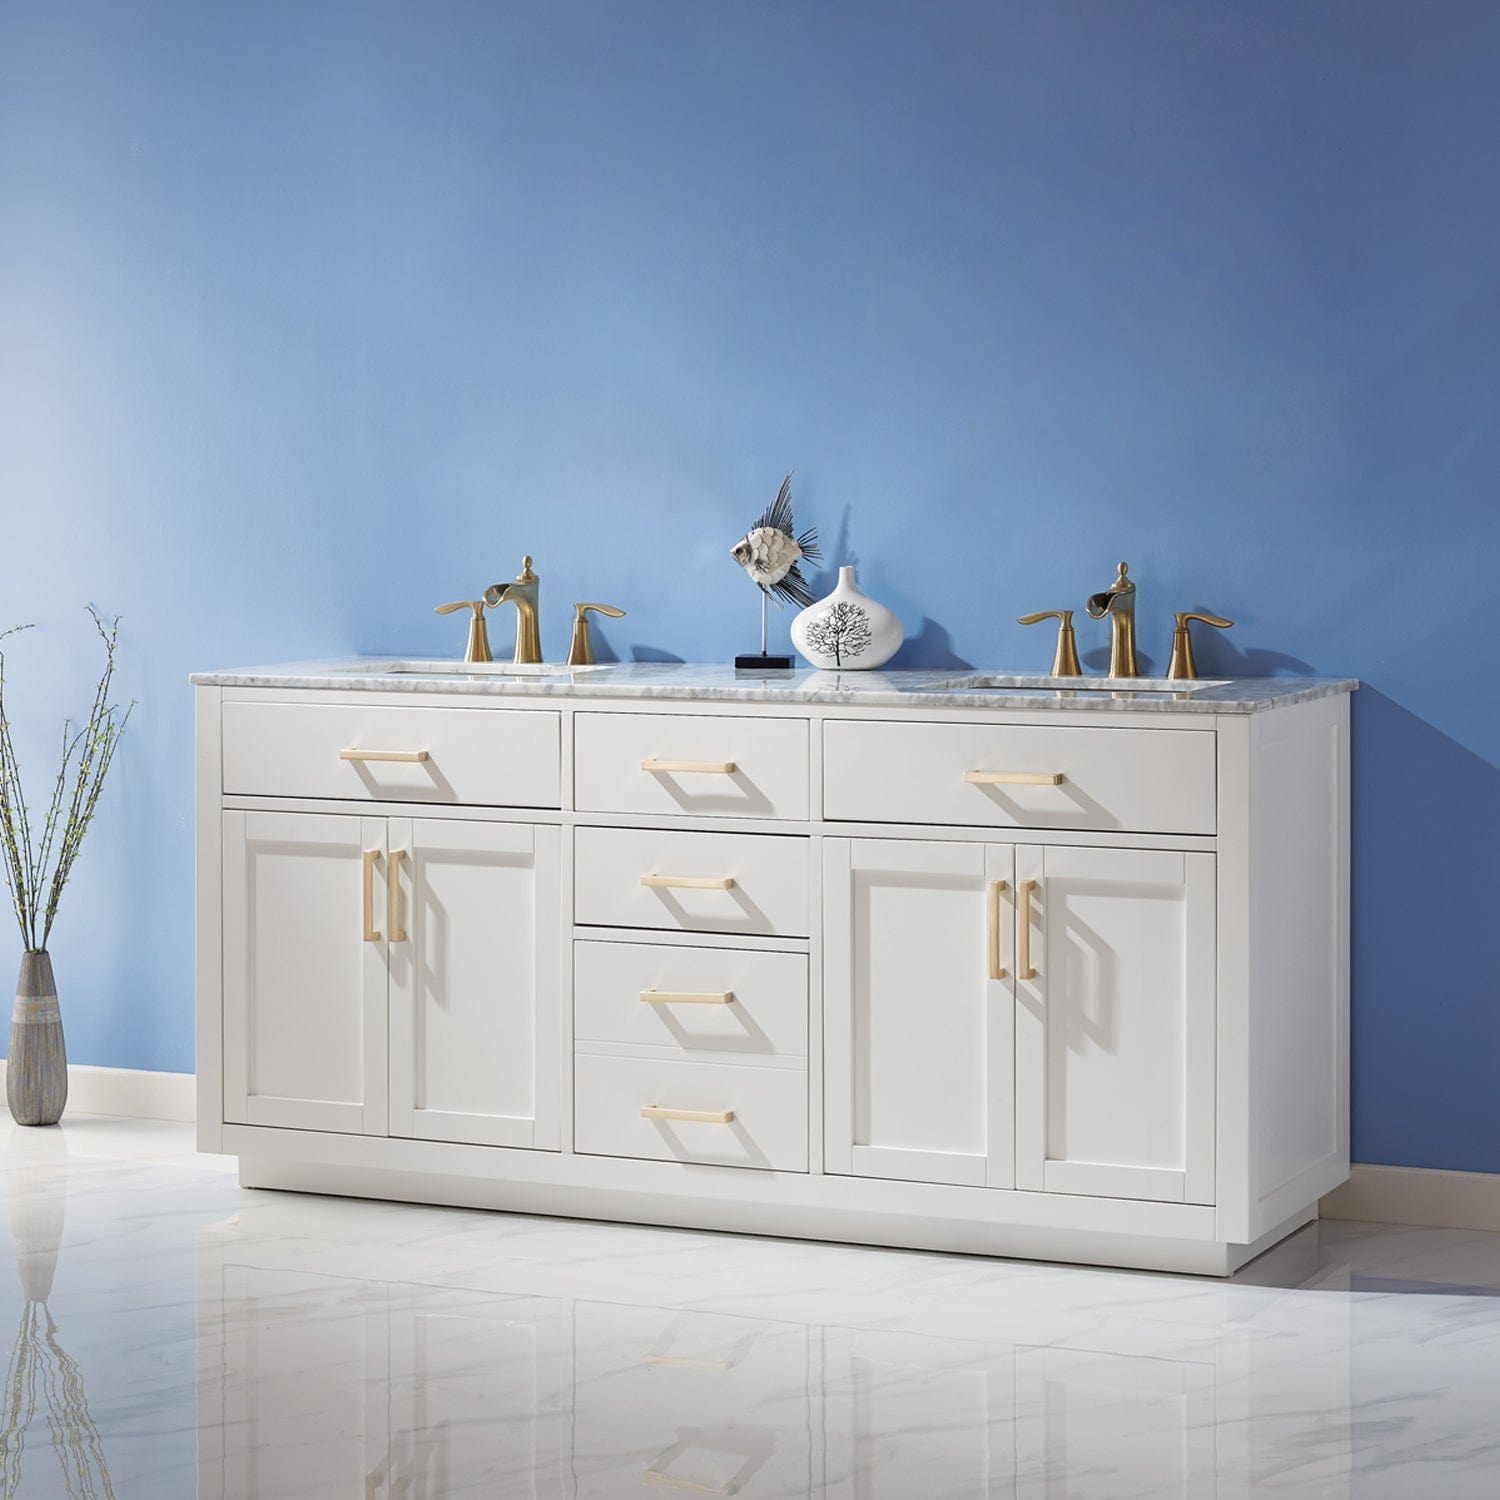 Altair Ivy 72" Double Bathroom Vanity Set in White and Carrara White Marble Countertop without Mirror 531072-WH-CA-NM - Molaix631112971324Vanity531072-WH-CA-NM